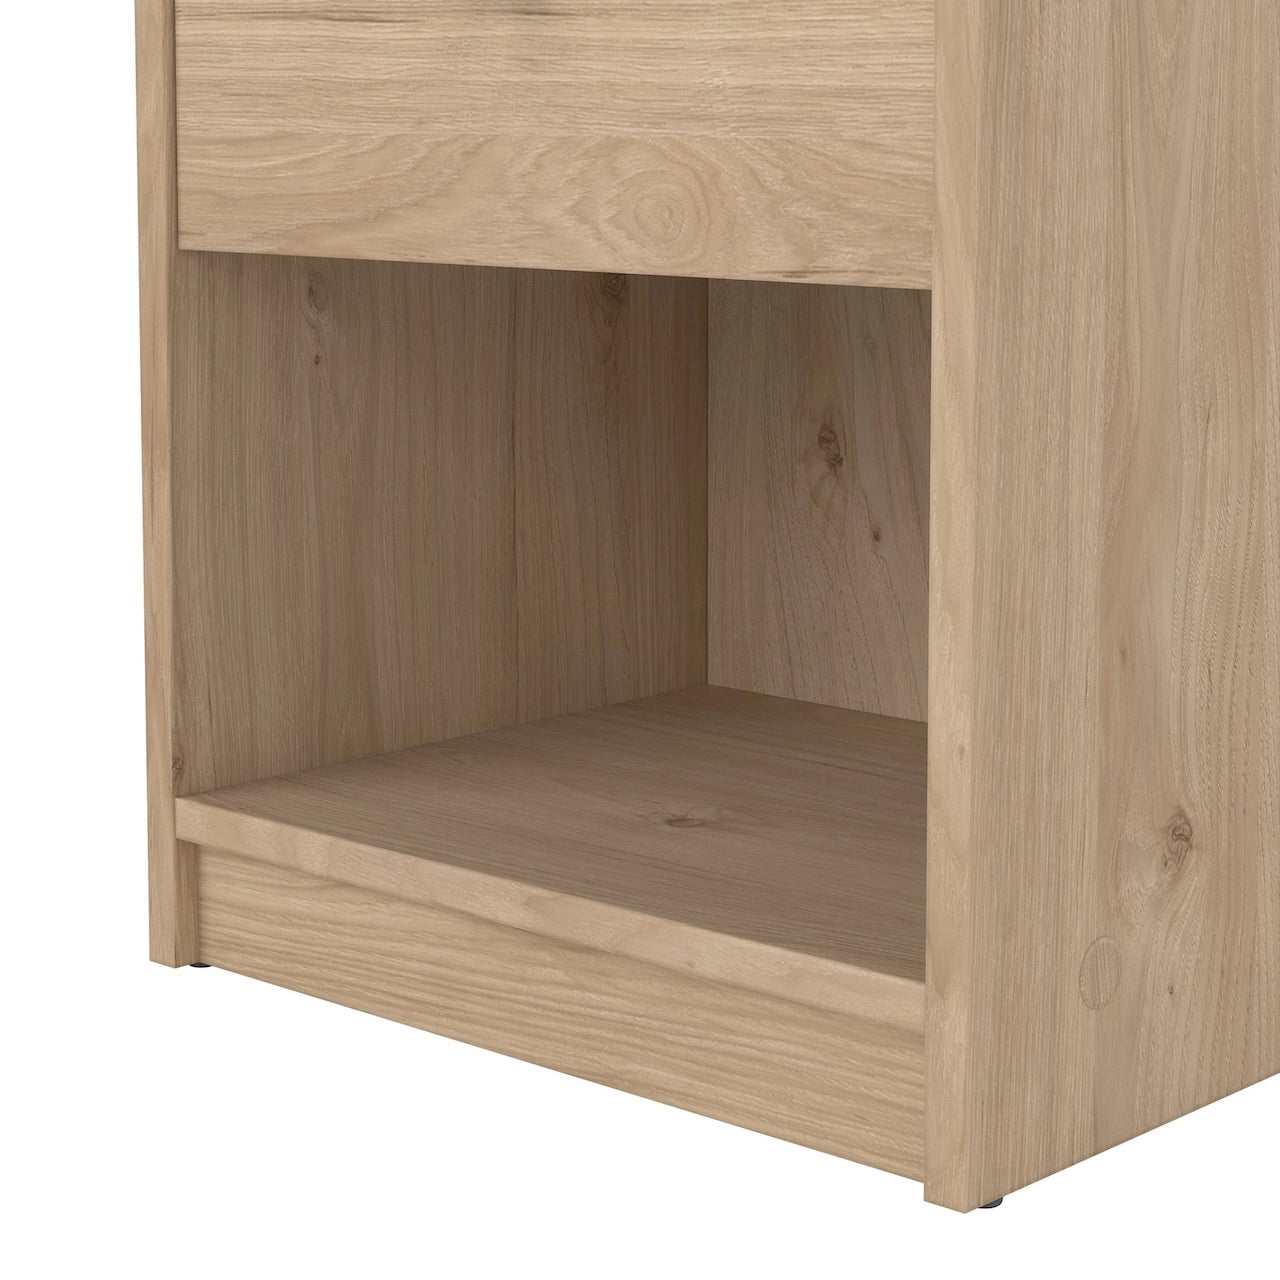 Furniture To Go May Bedside 1 Drawer in Jackson Hickory Oak